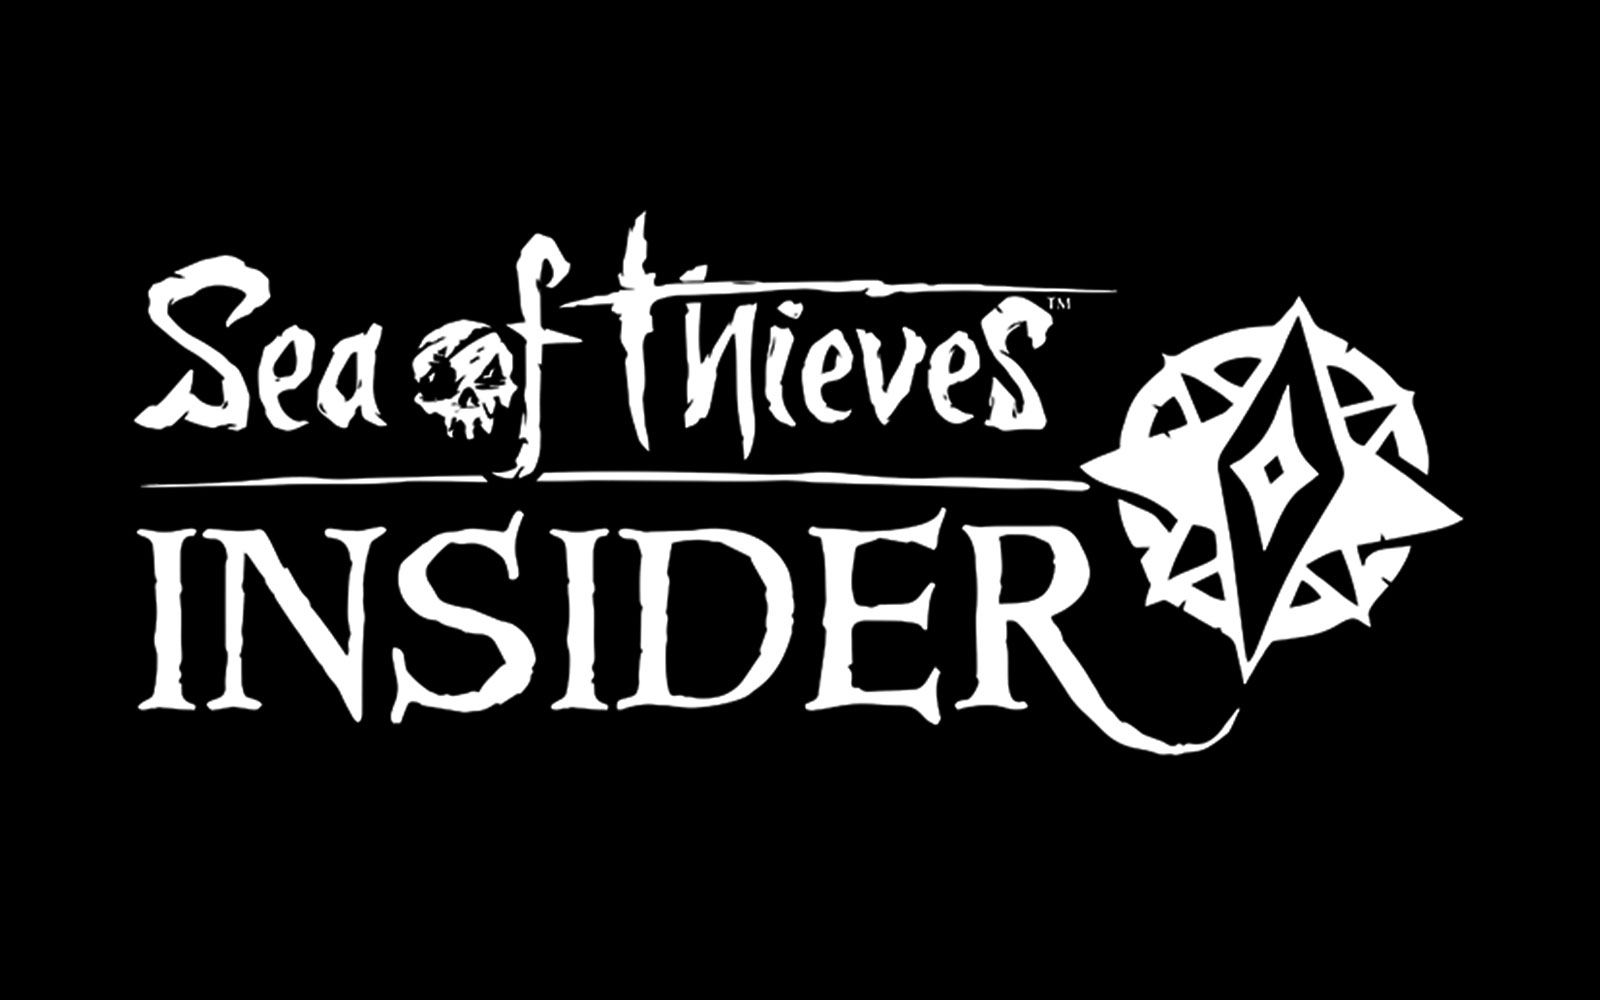 sea of thieves insider